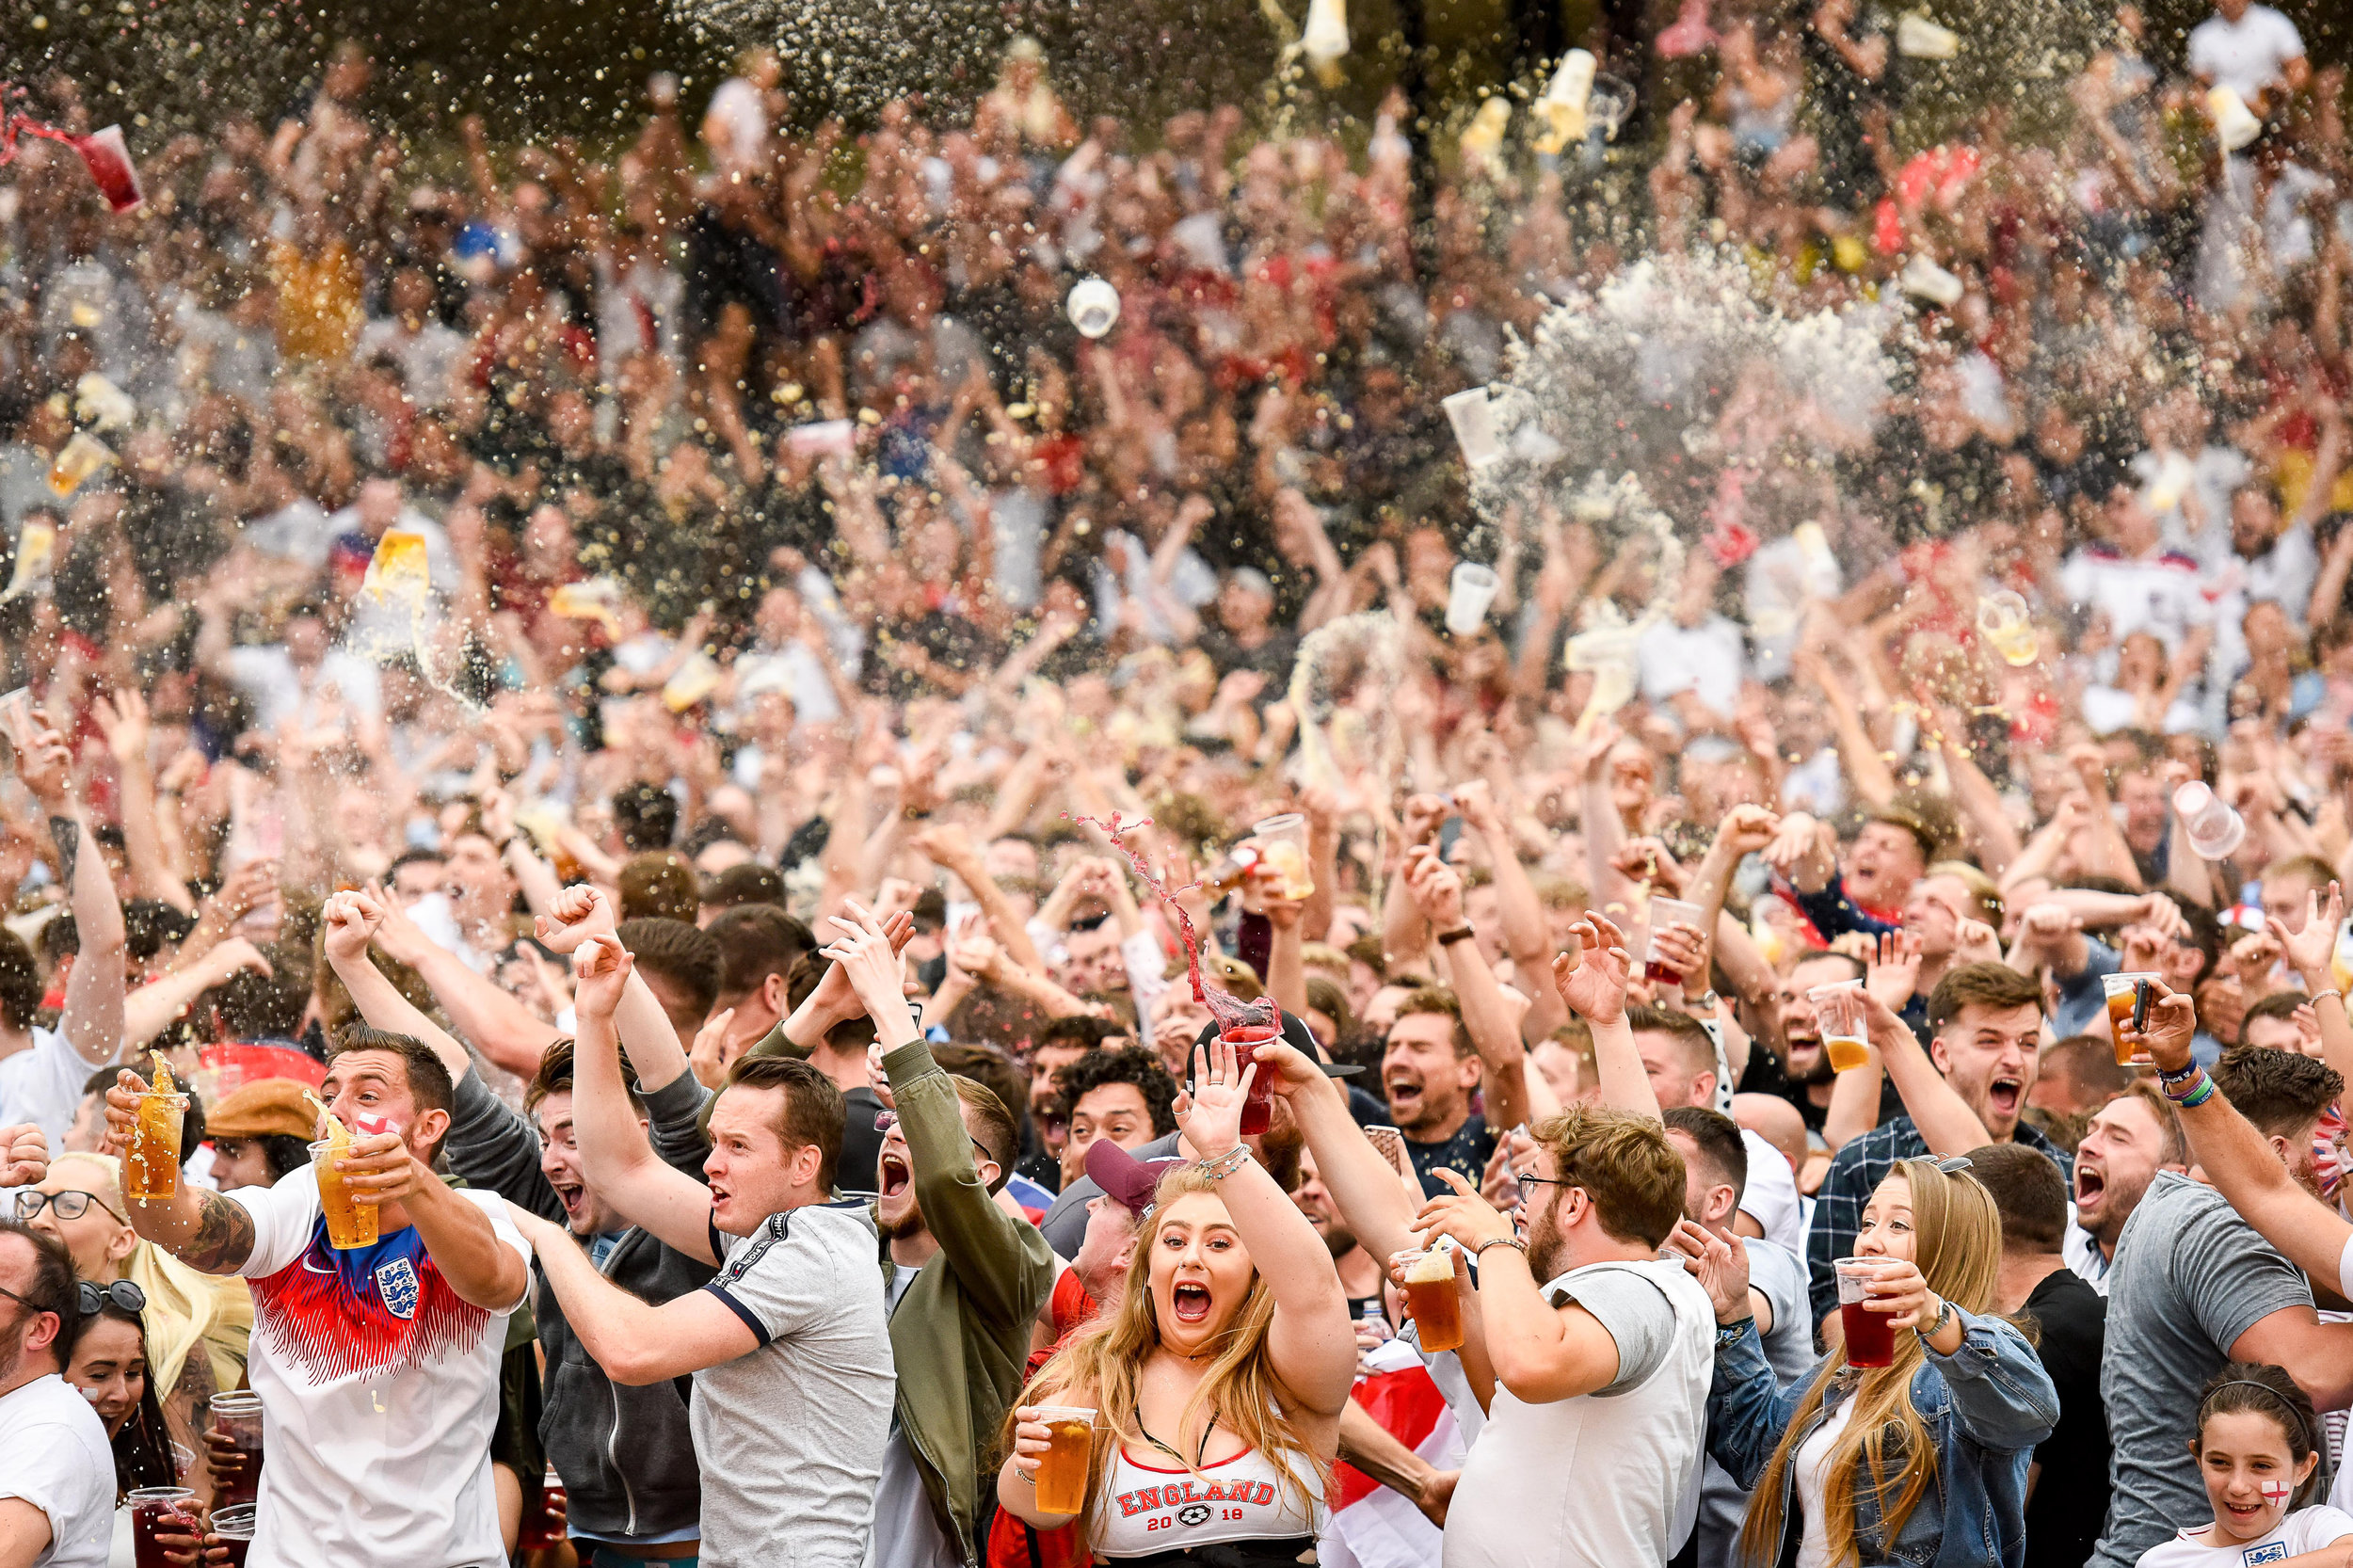  Eight thousand fans at the Castlefield Bowl in Manchester city centre react to Kieran Trippier's goal for England during their World Cup semi final against Croatia.
Photo by Jacob King, 11 July 2018
 